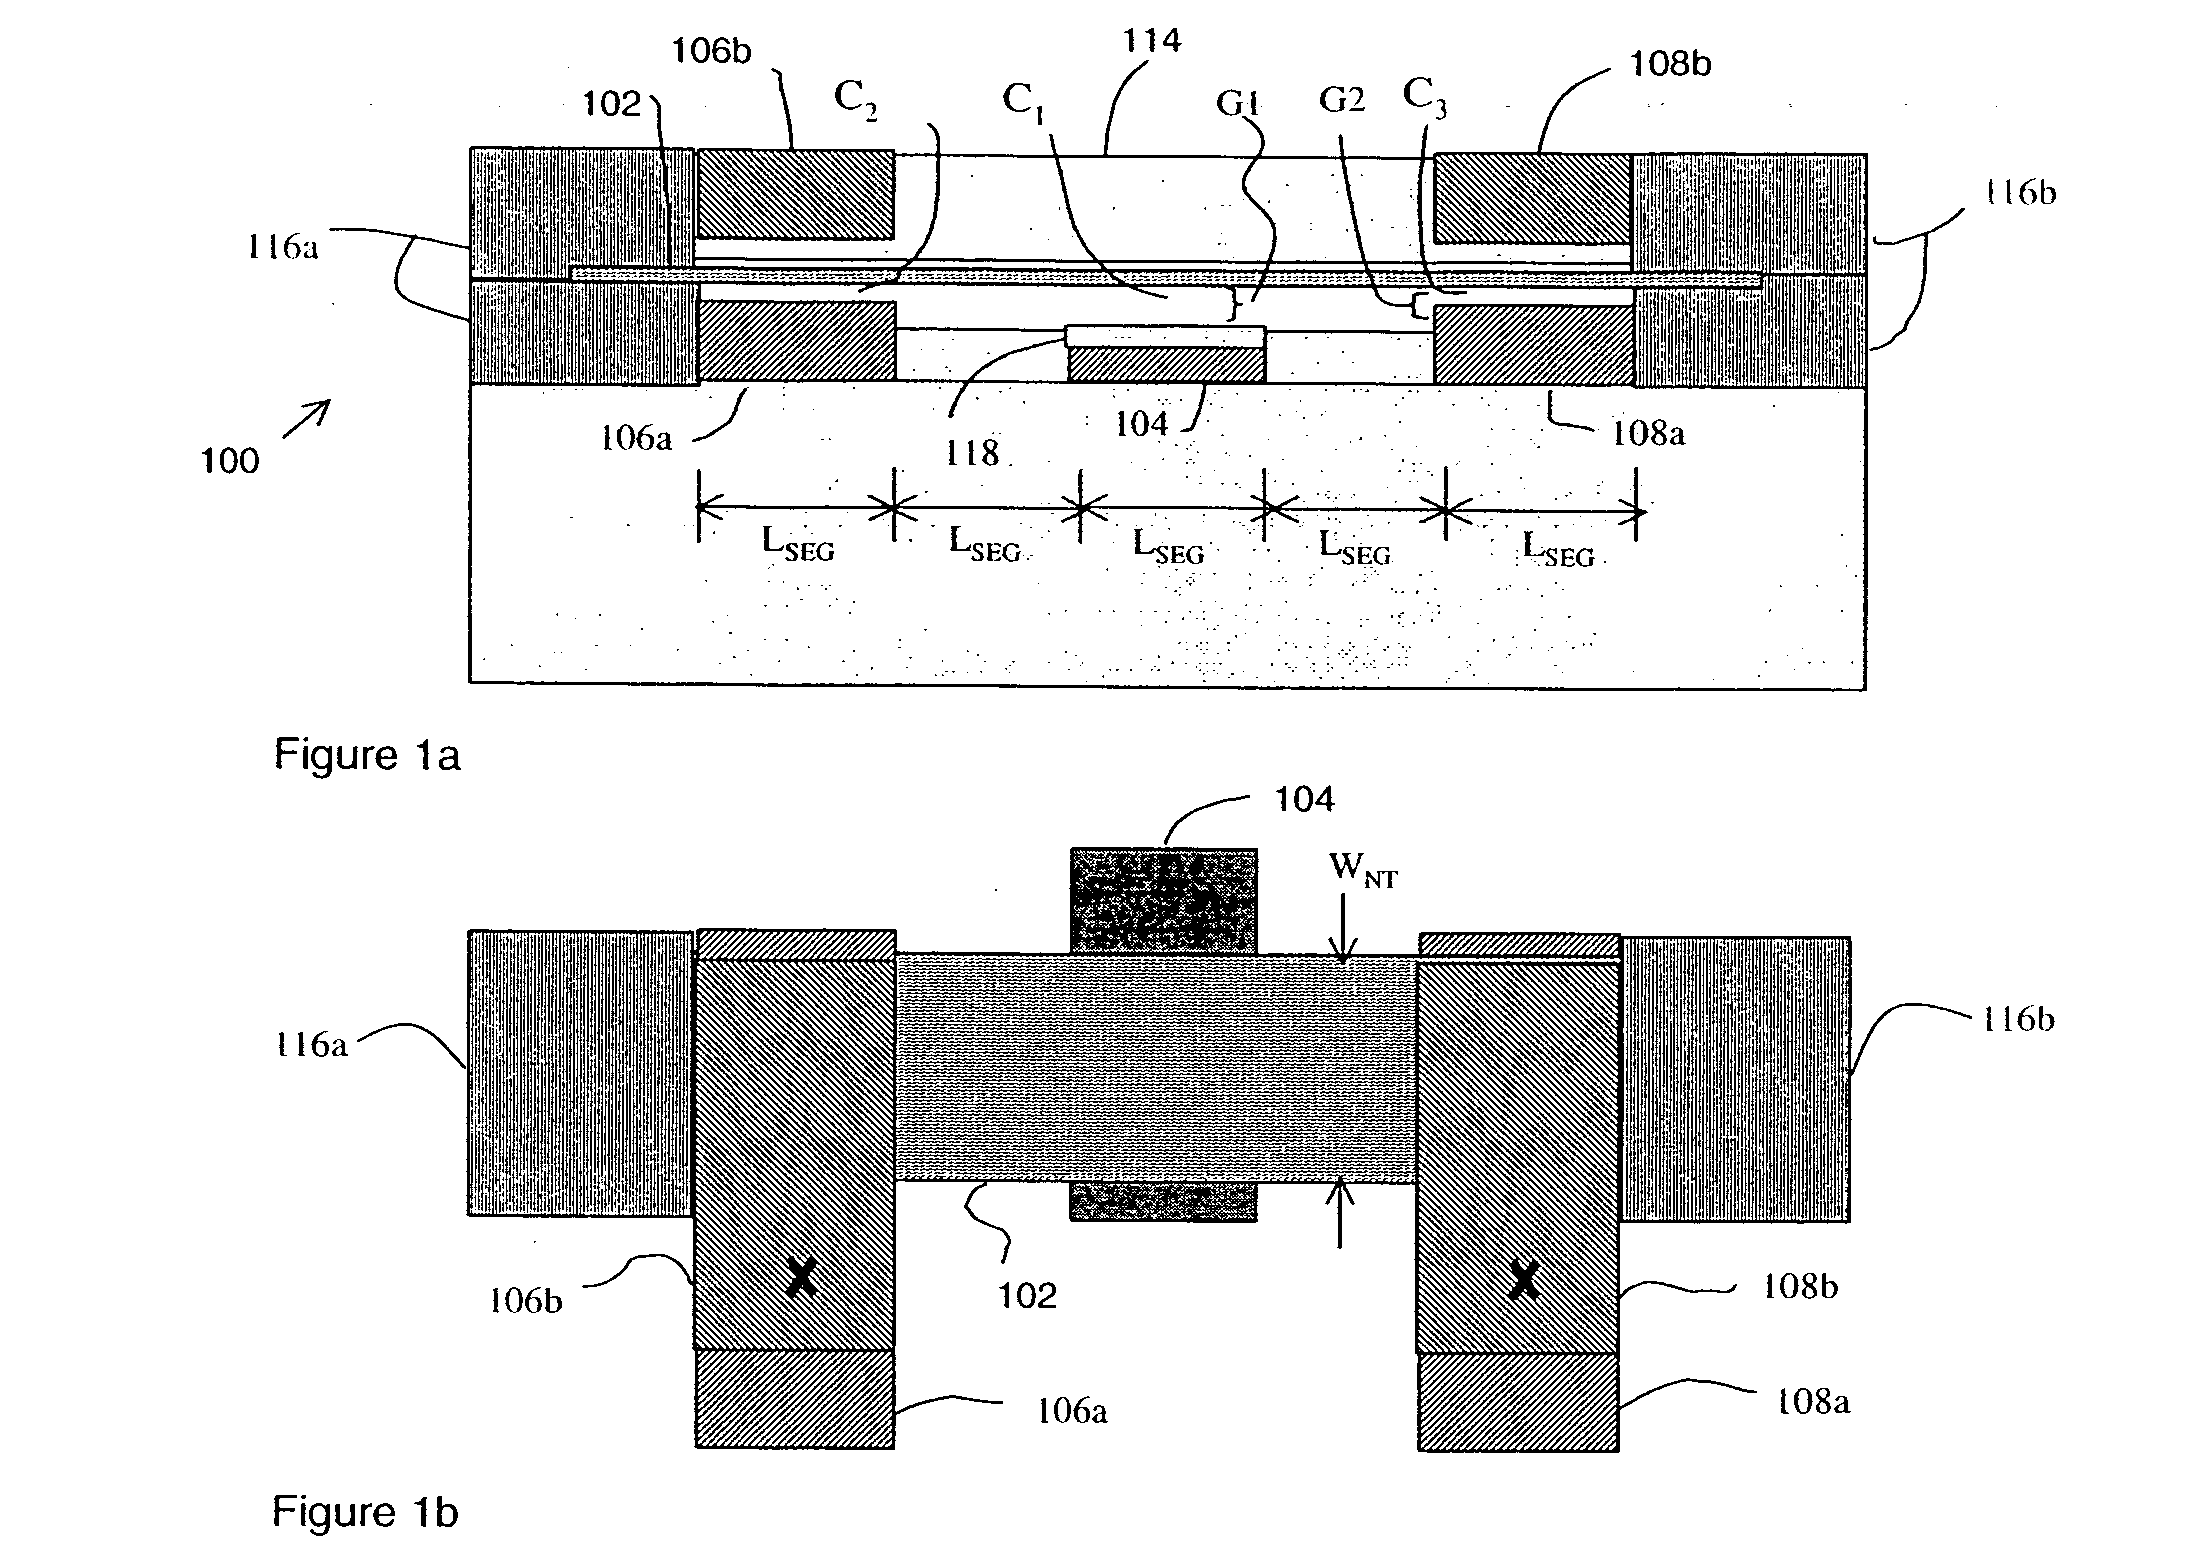 Nanotube-based transfer devices and related circuits